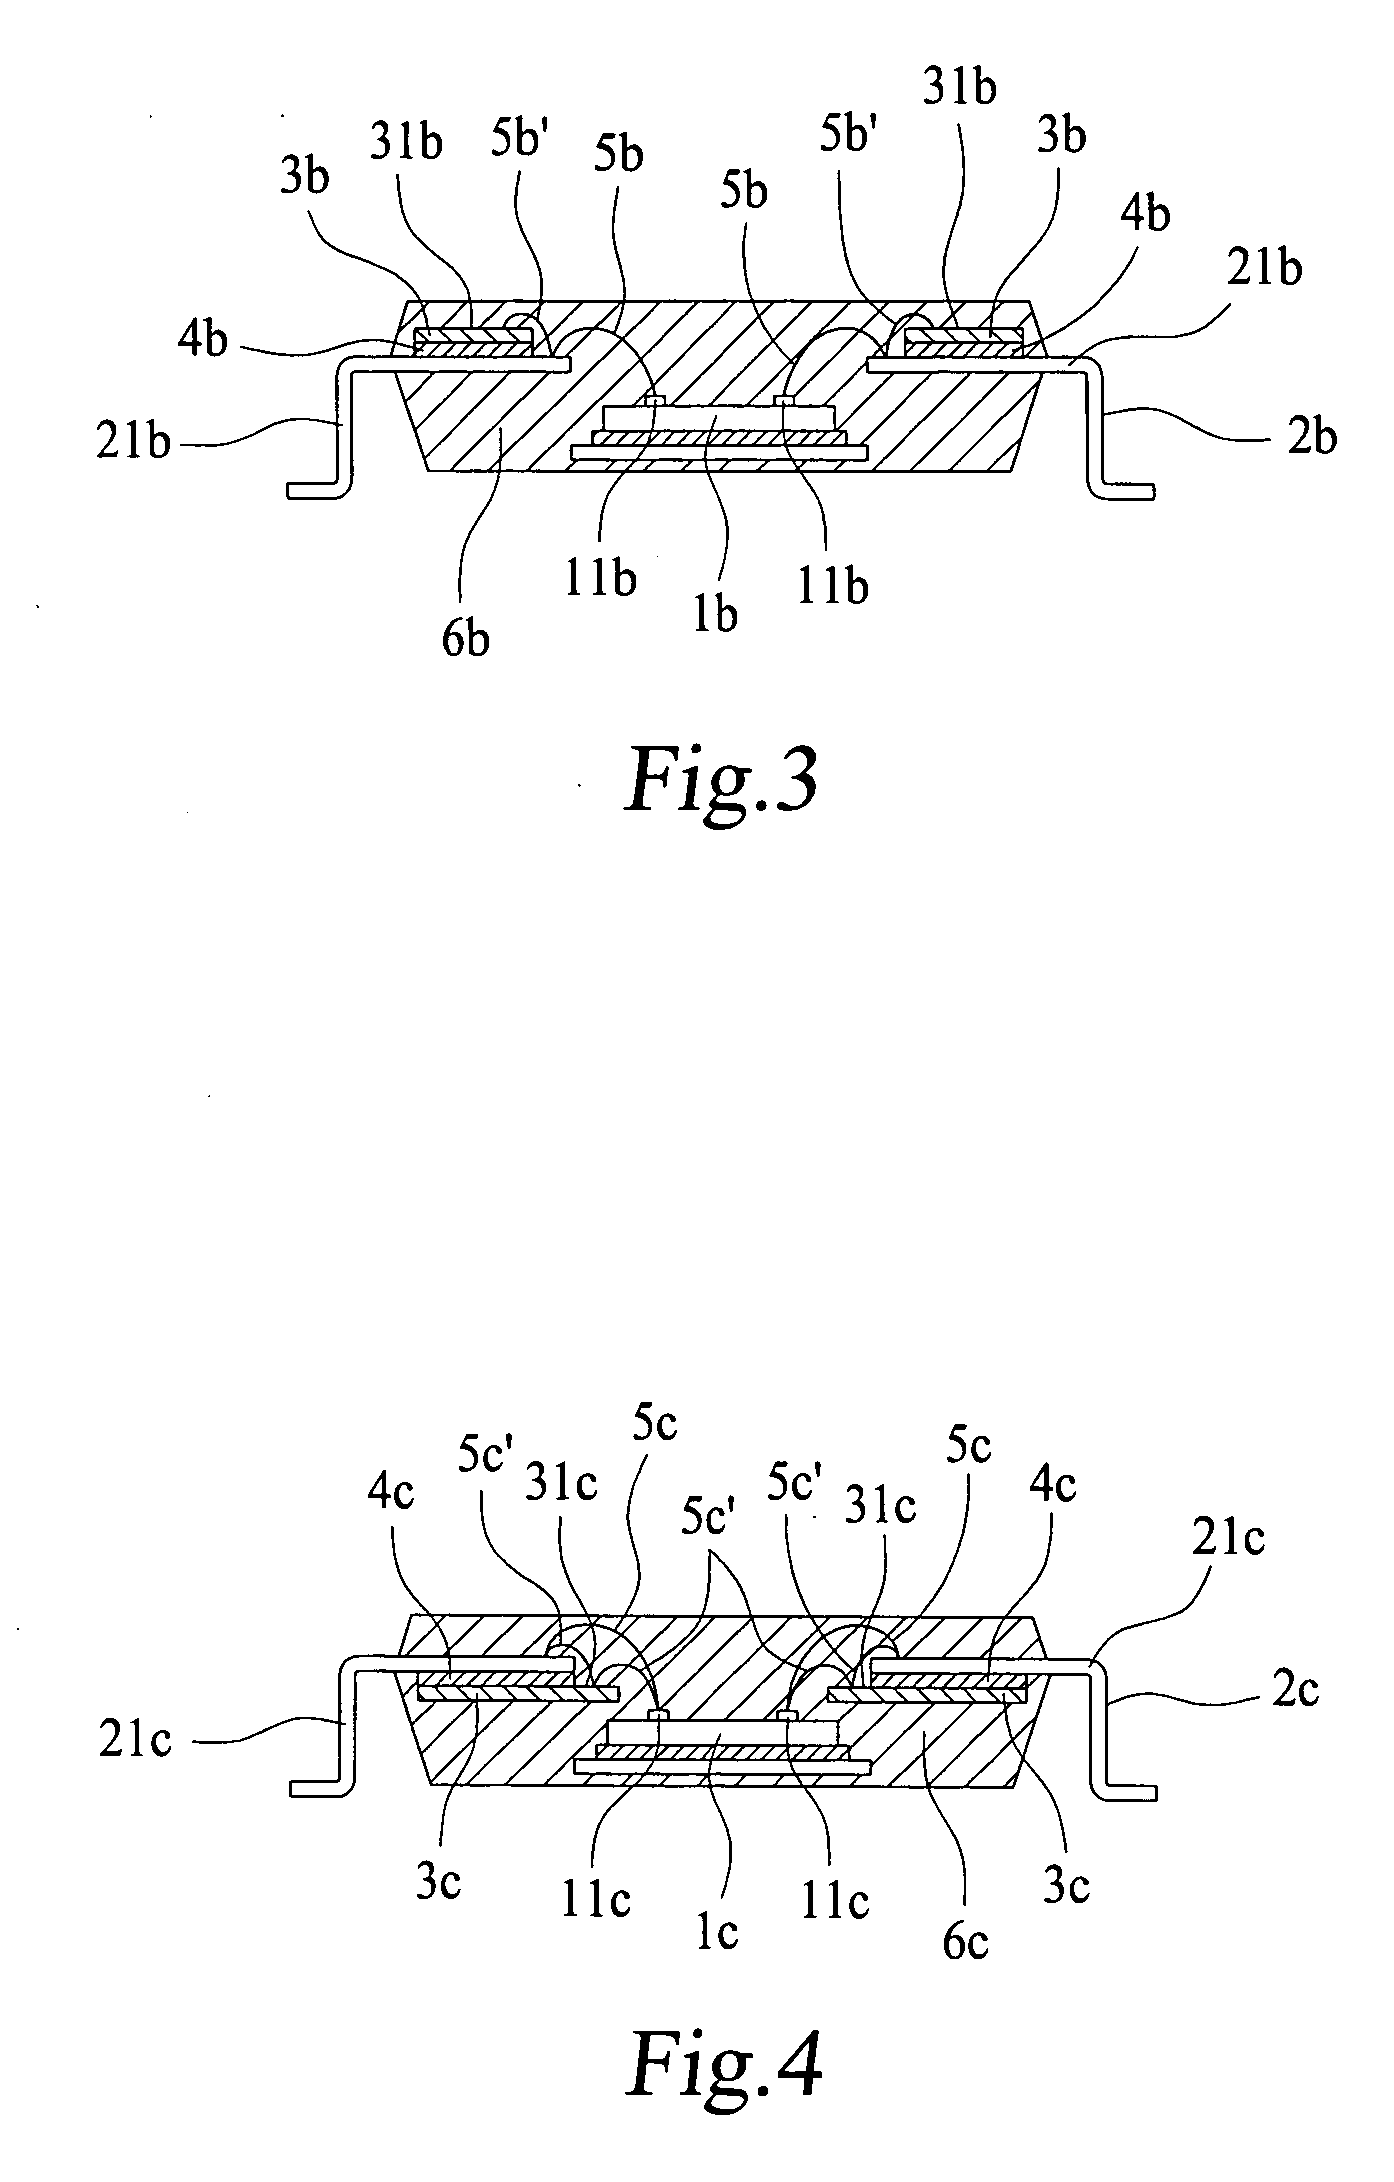 Packaged chip capable of lowering characteristic impedance